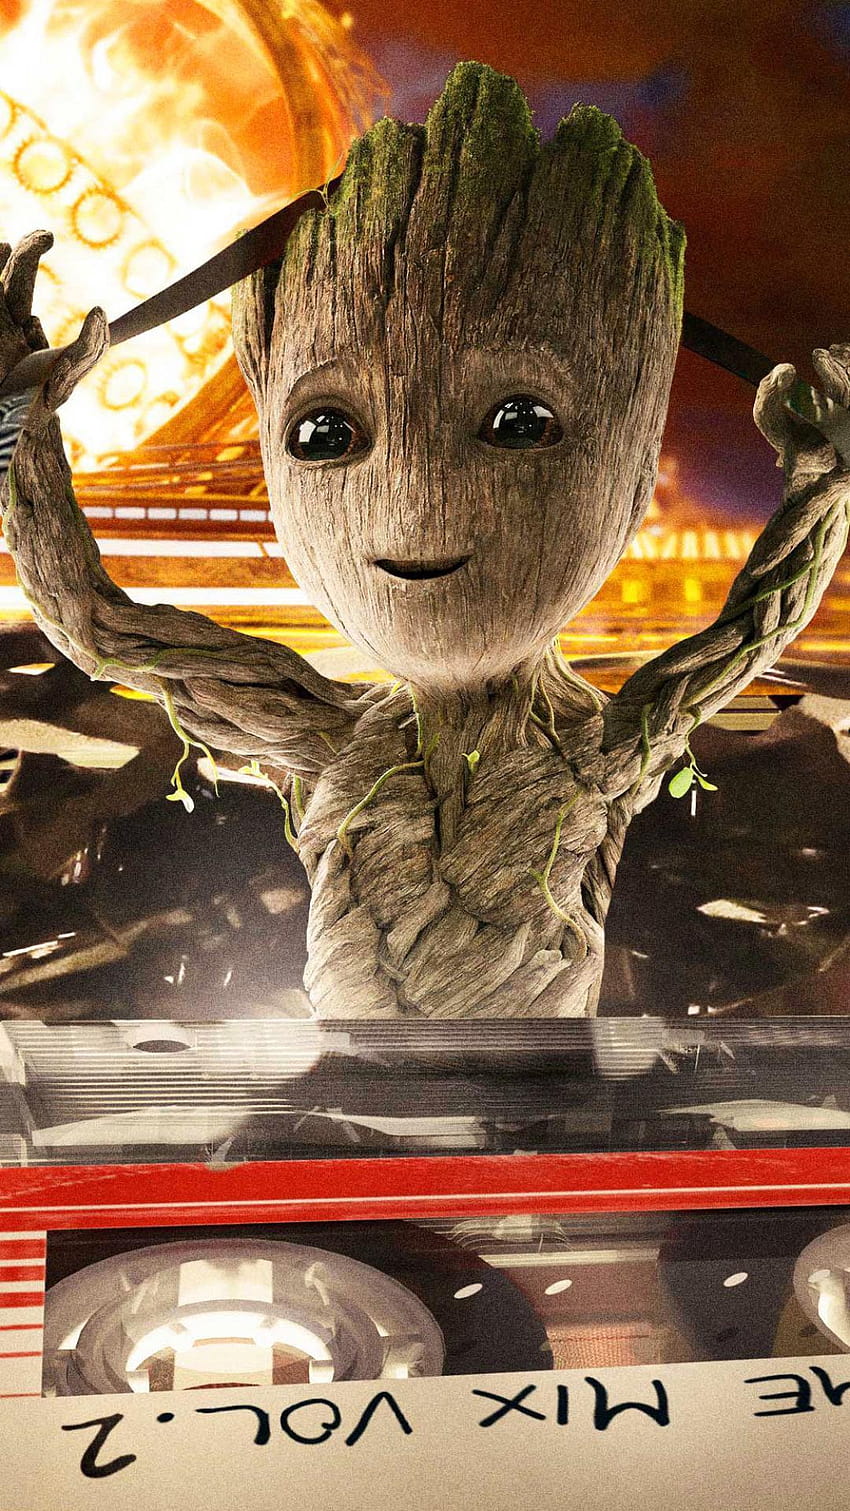 Android용 Full The Guardians Of The Galaxy, 폰 가디언 갤럭시 HD 전화 배경 화면